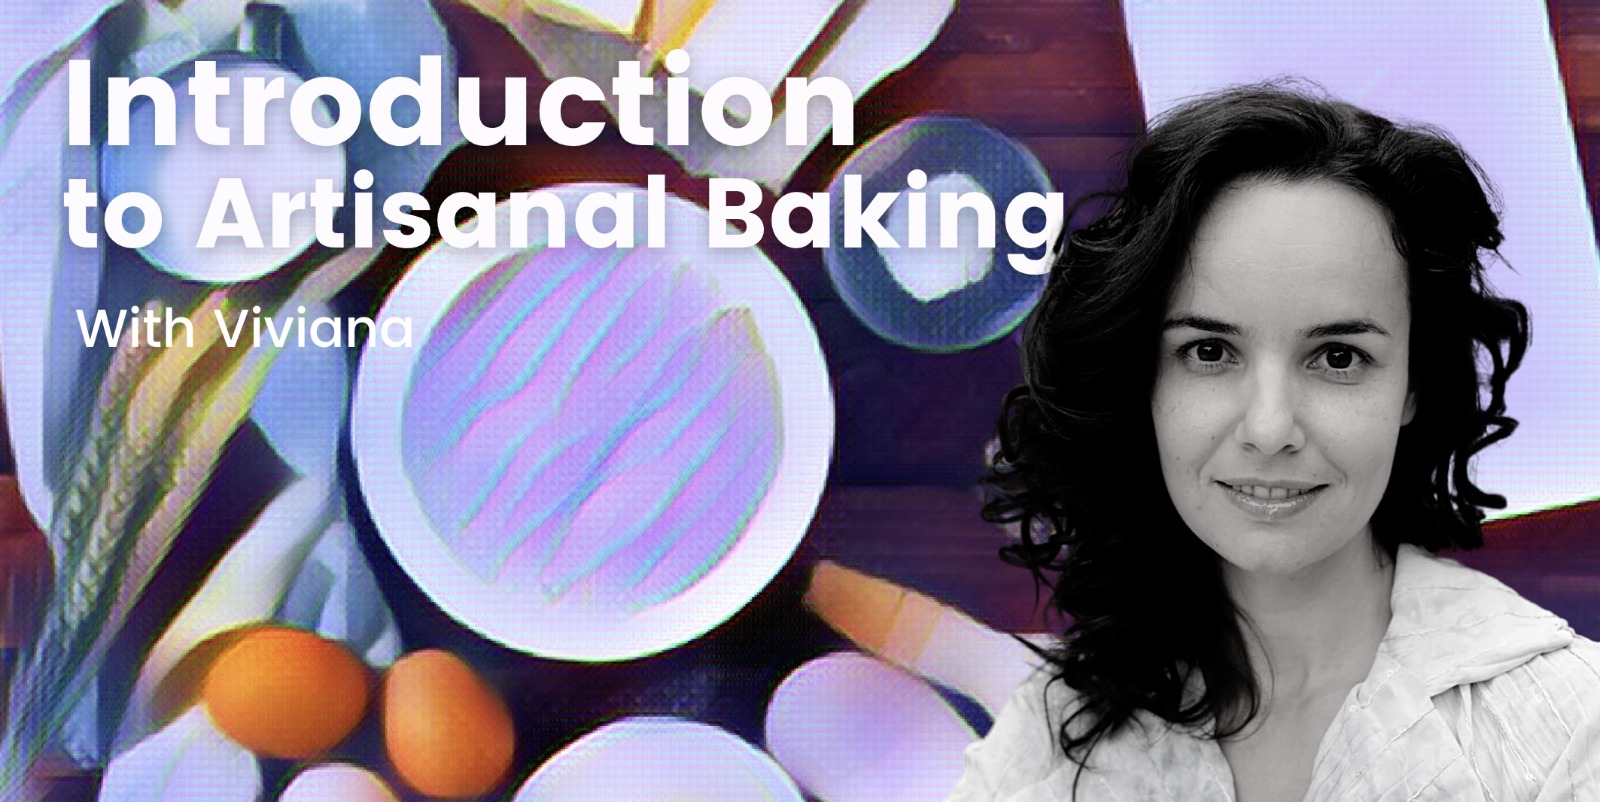 Introduction to Artisanal Baking with Viviana